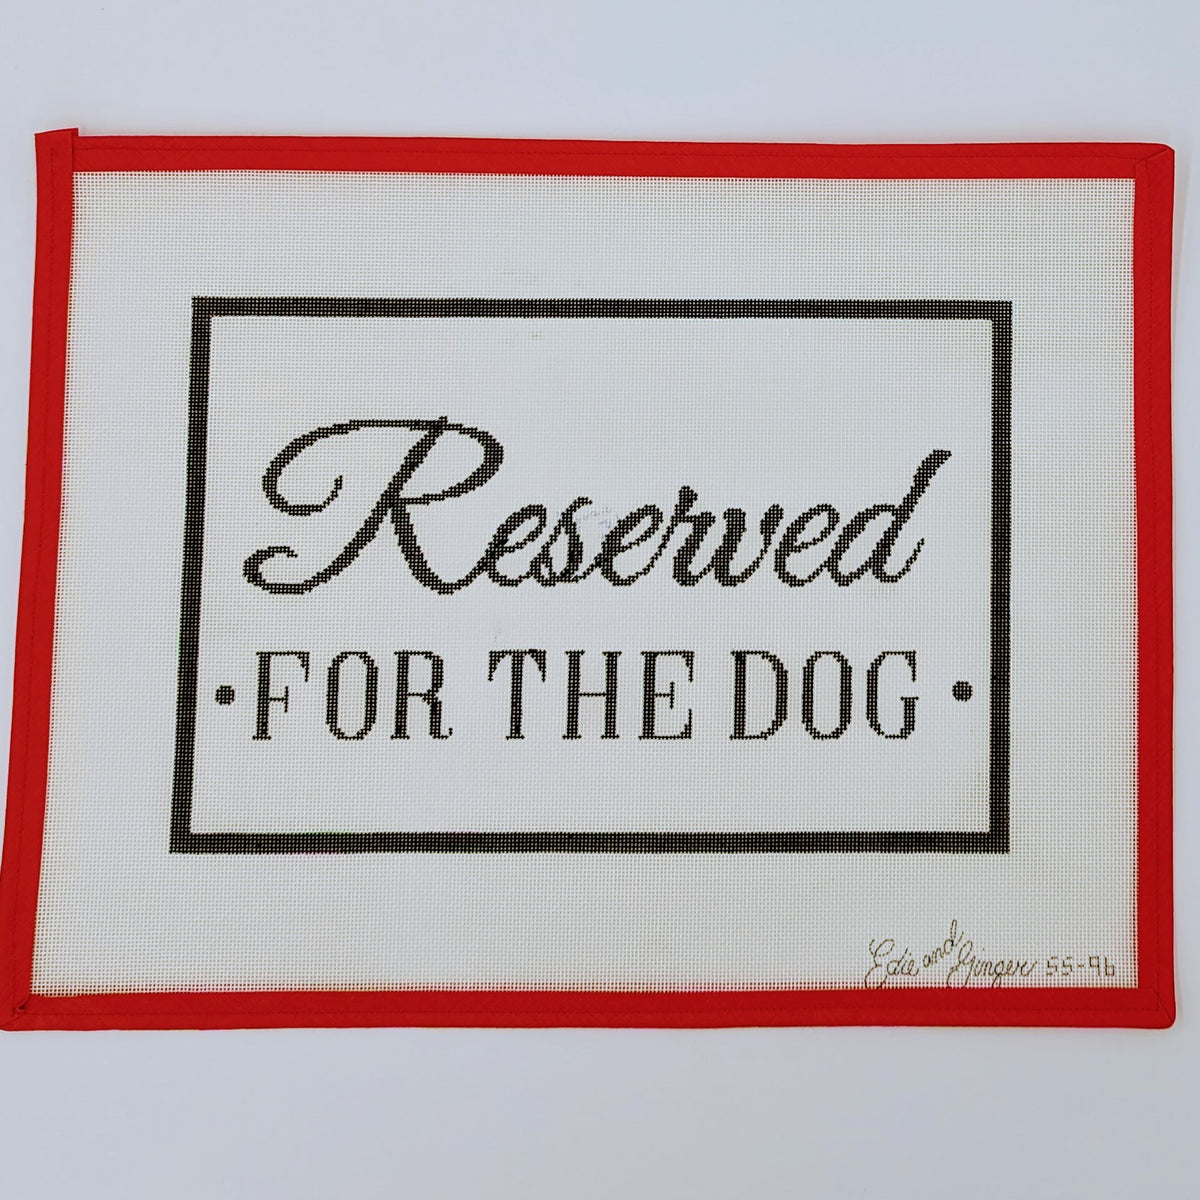 Reserved for the Dog